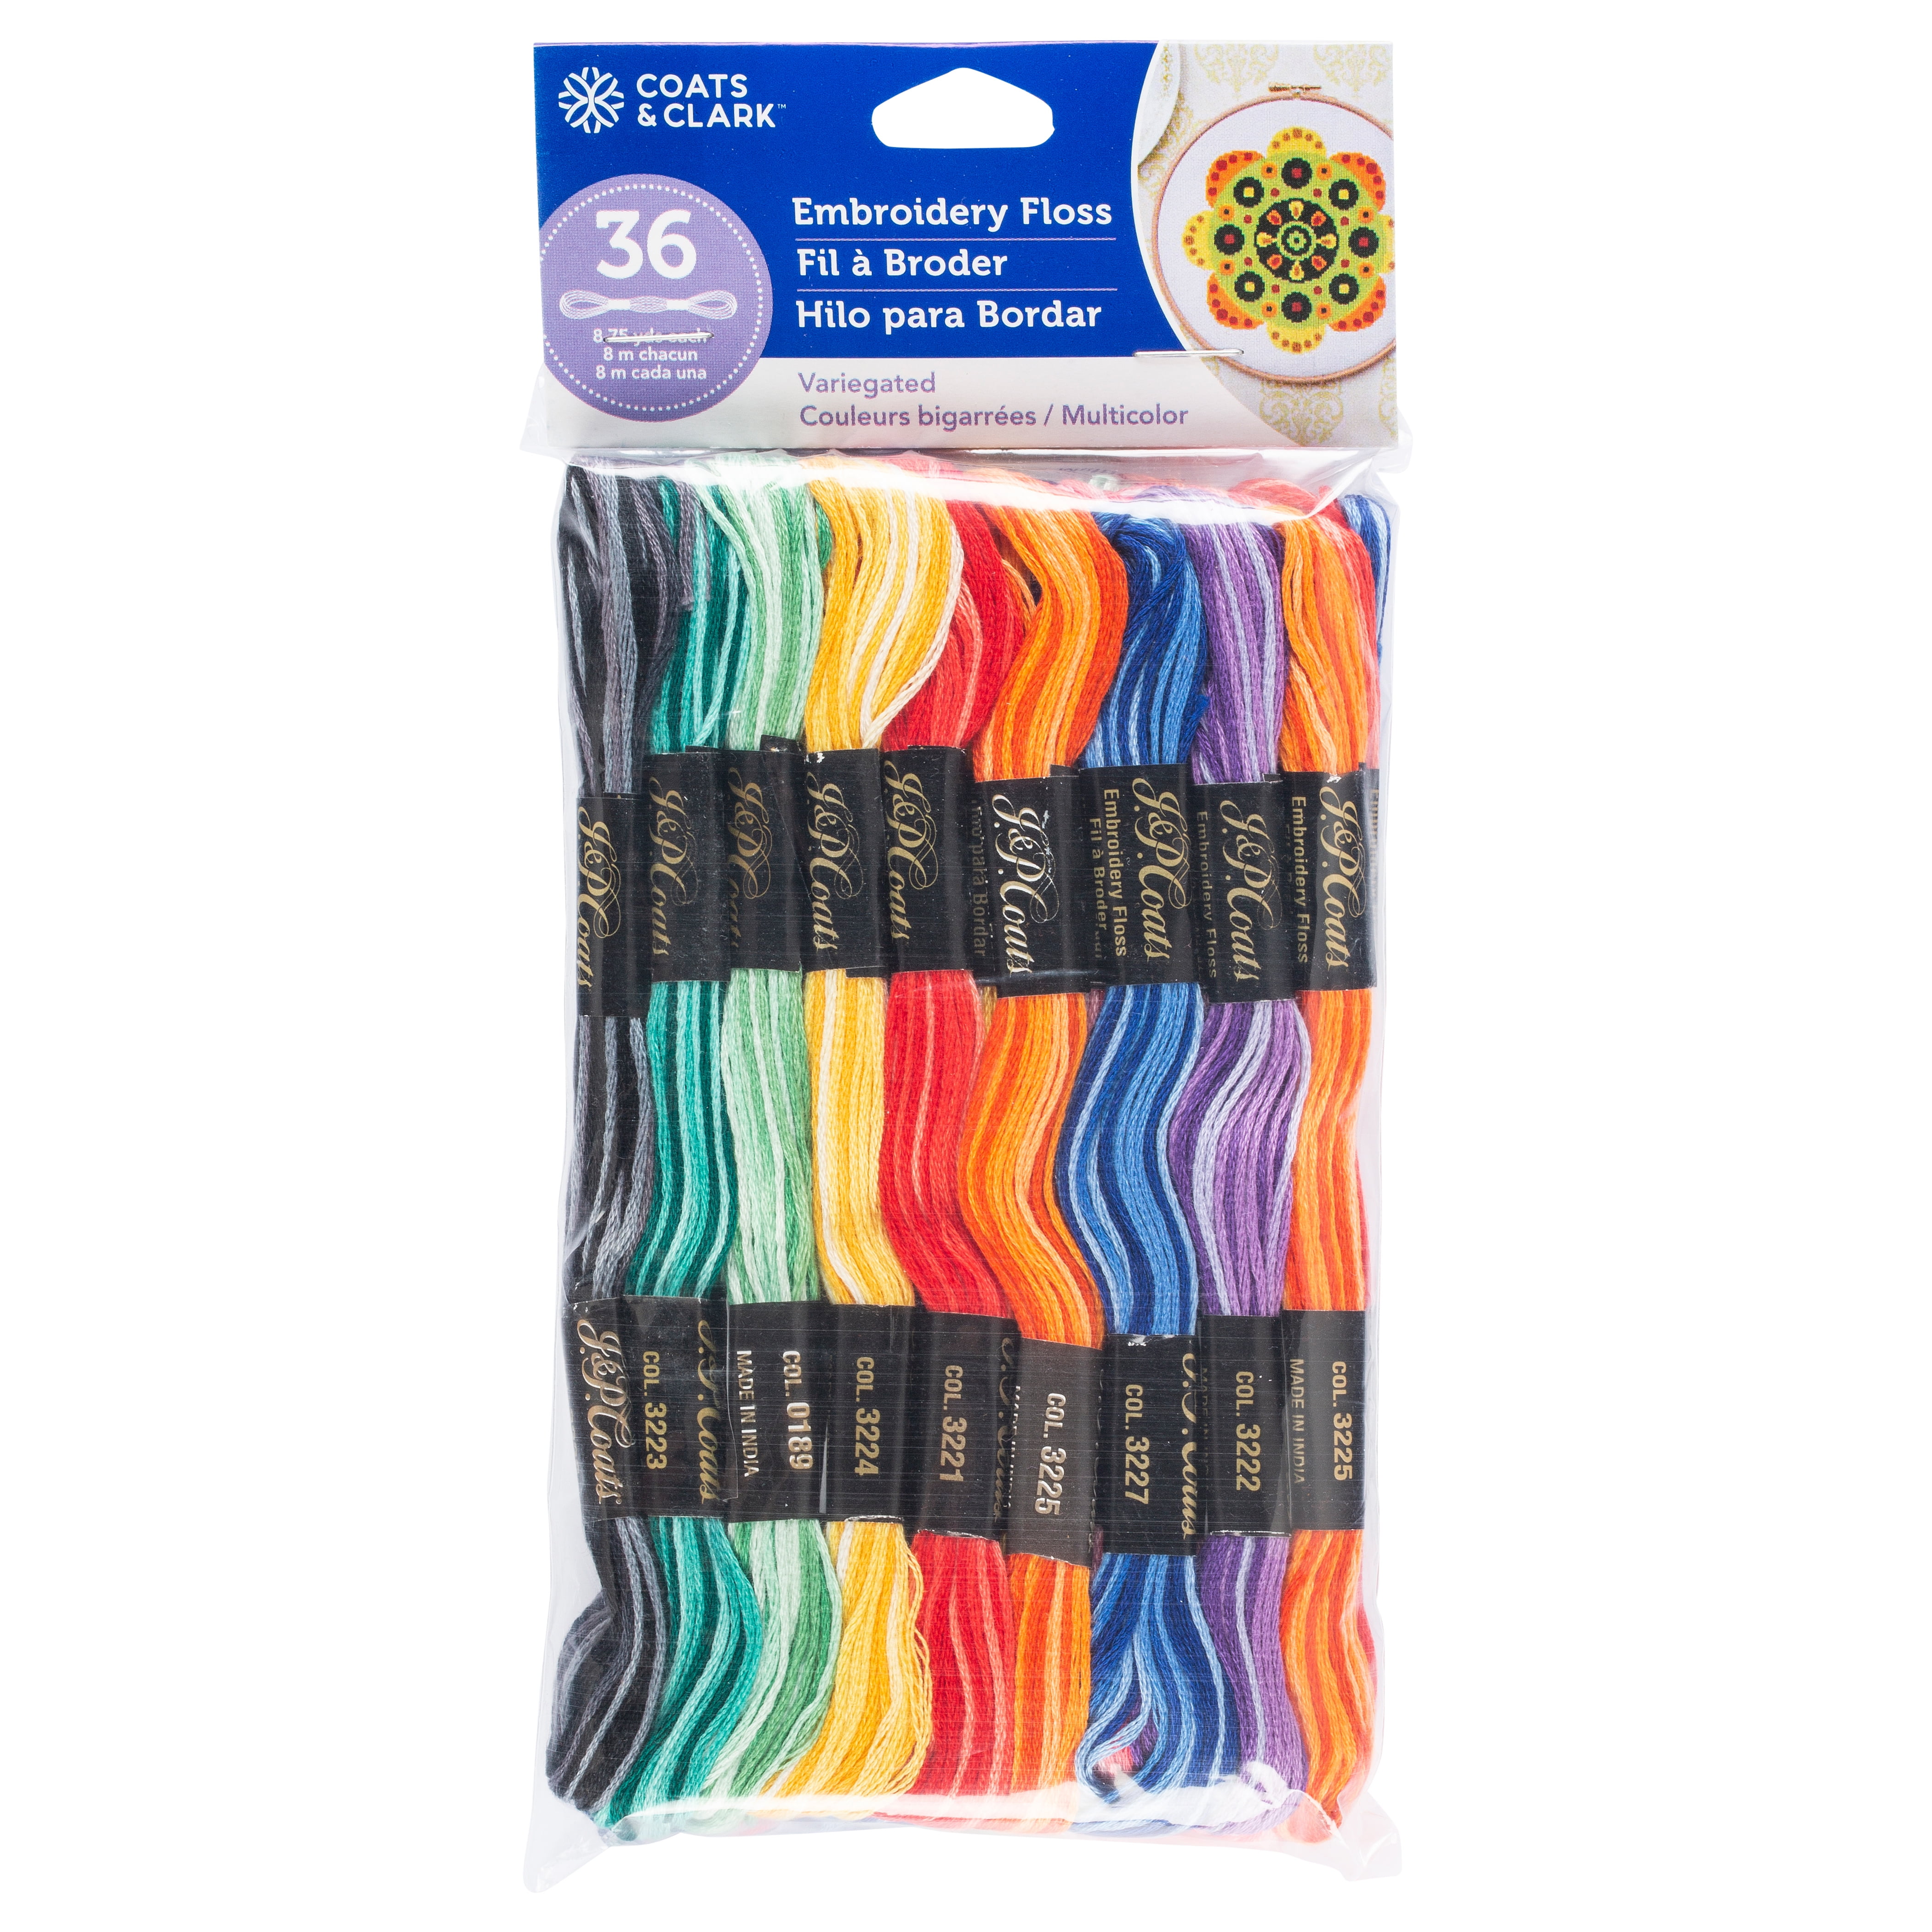 J & P Coats Embroidery Floss Value Pack, 1 Each